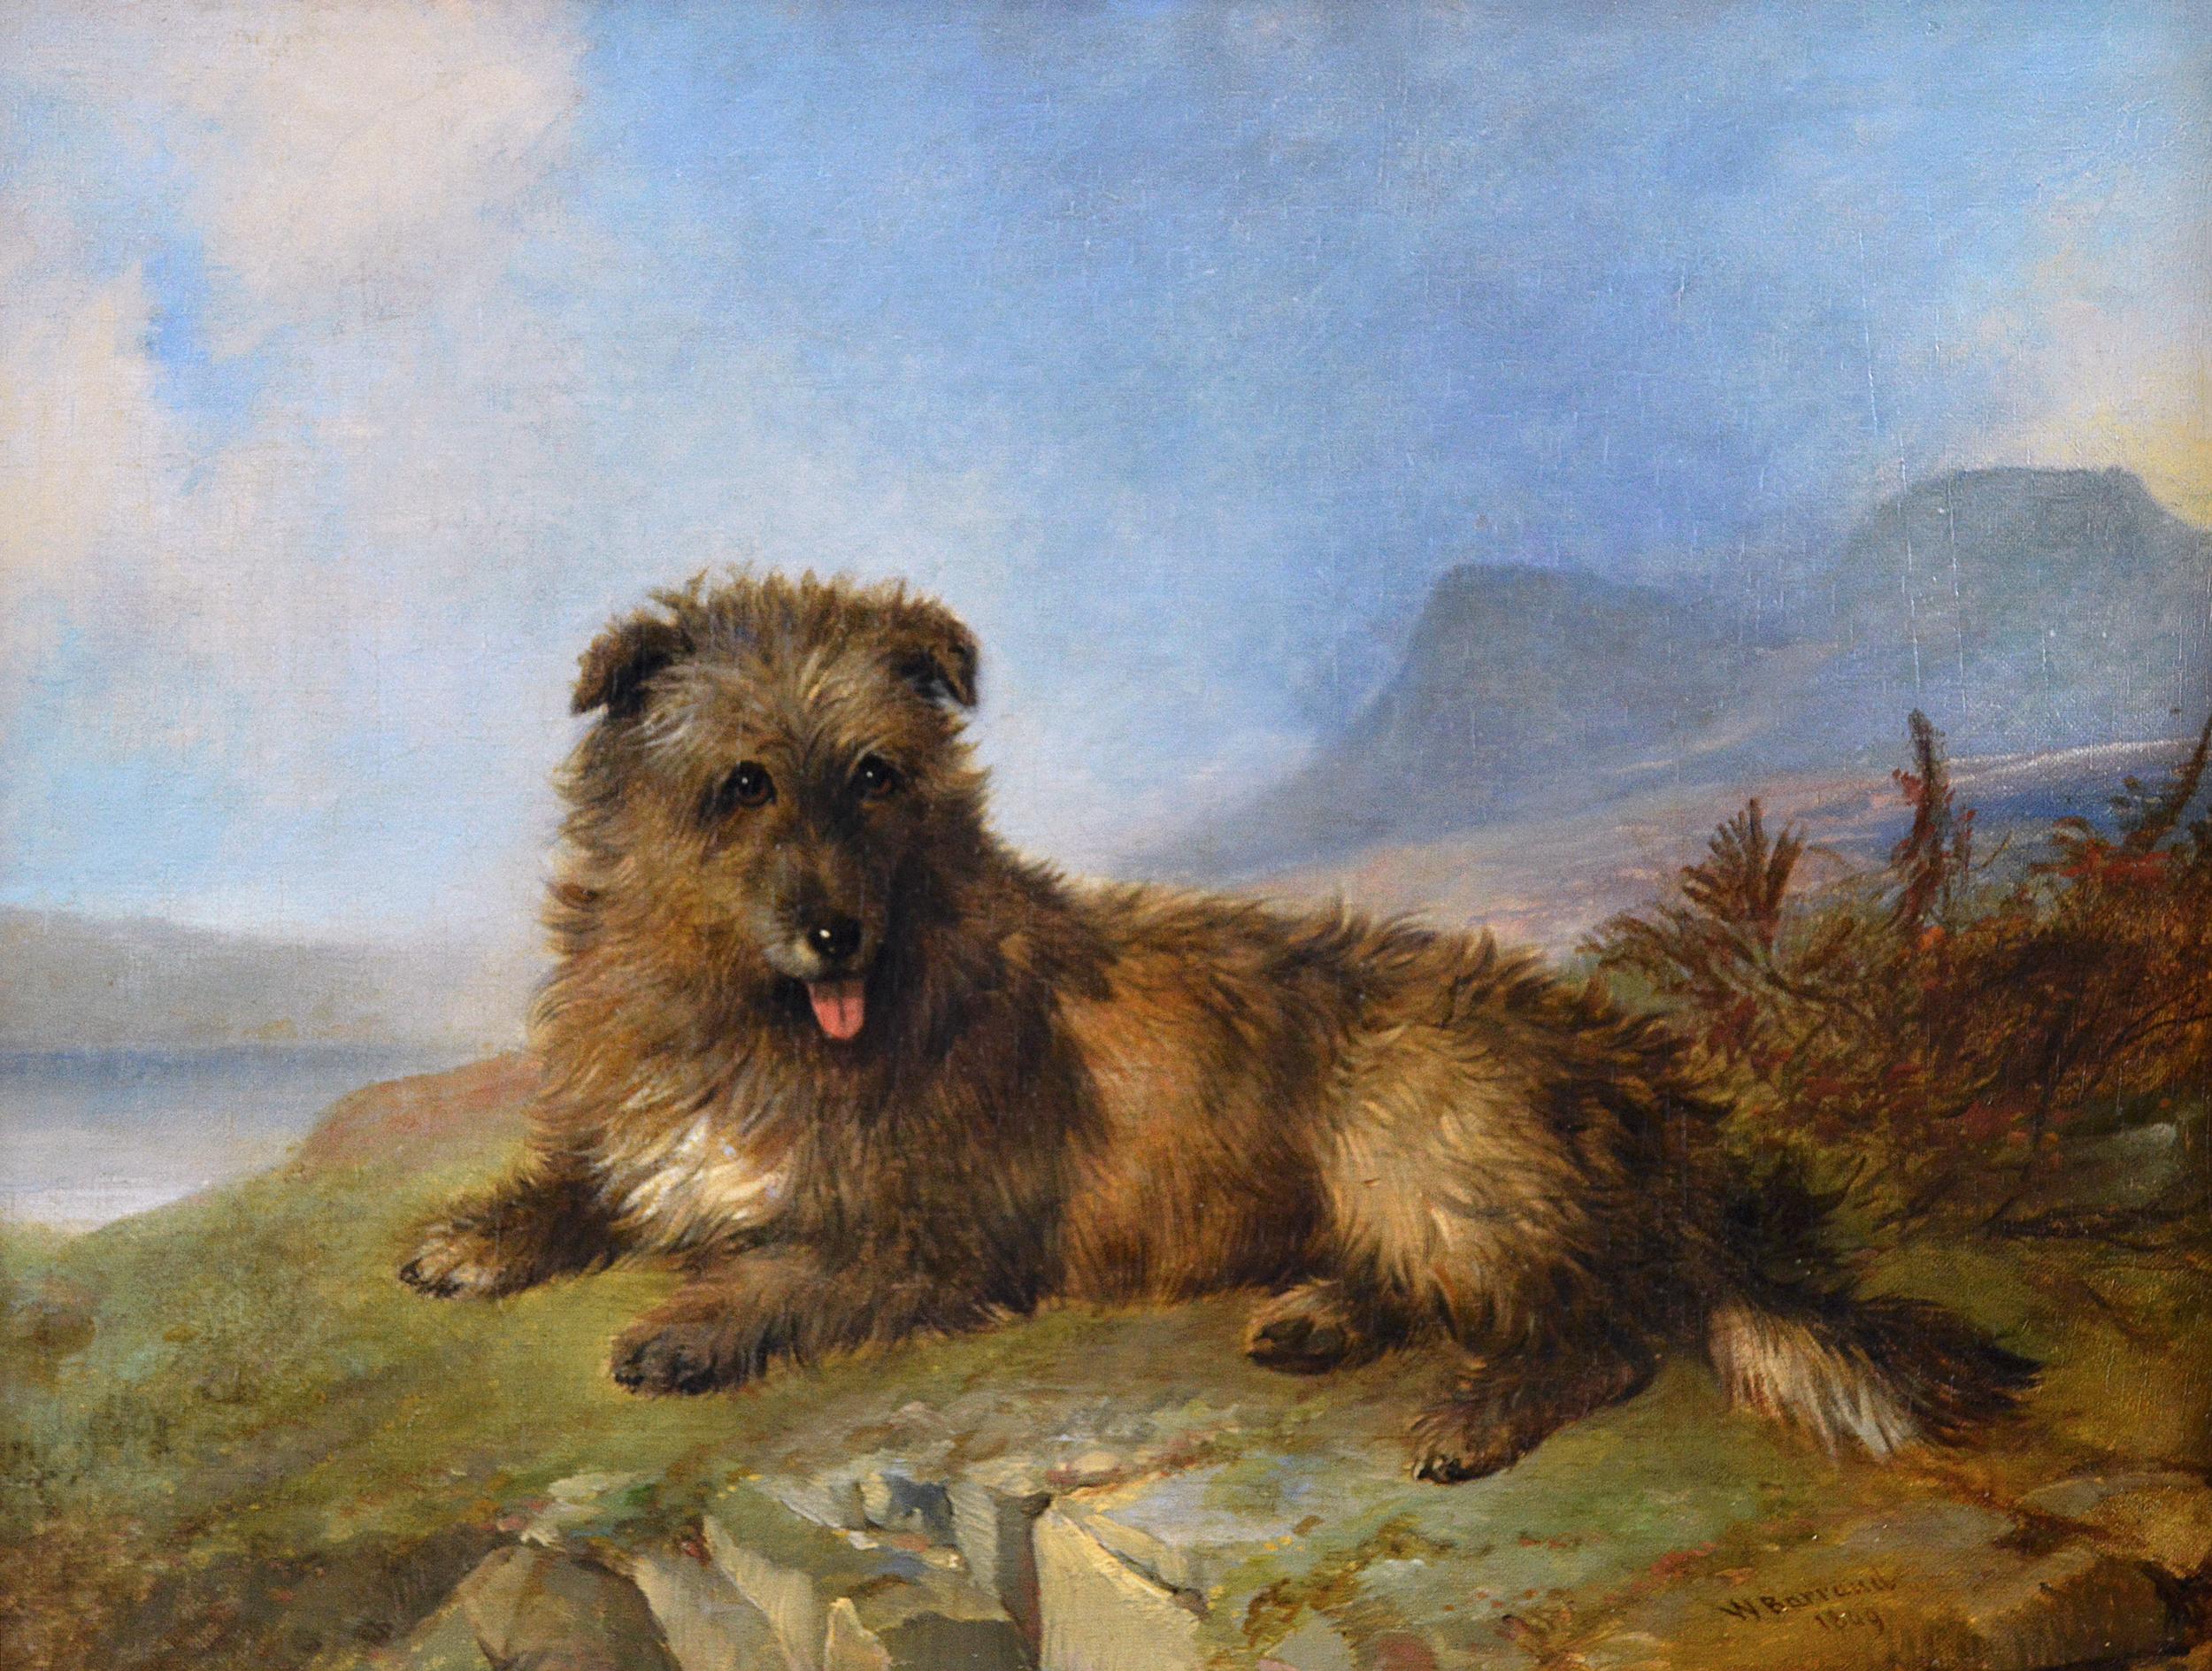 19th Century sporting animal oil painting portrait of a Cairn terrier dog  - Painting by William Barraud